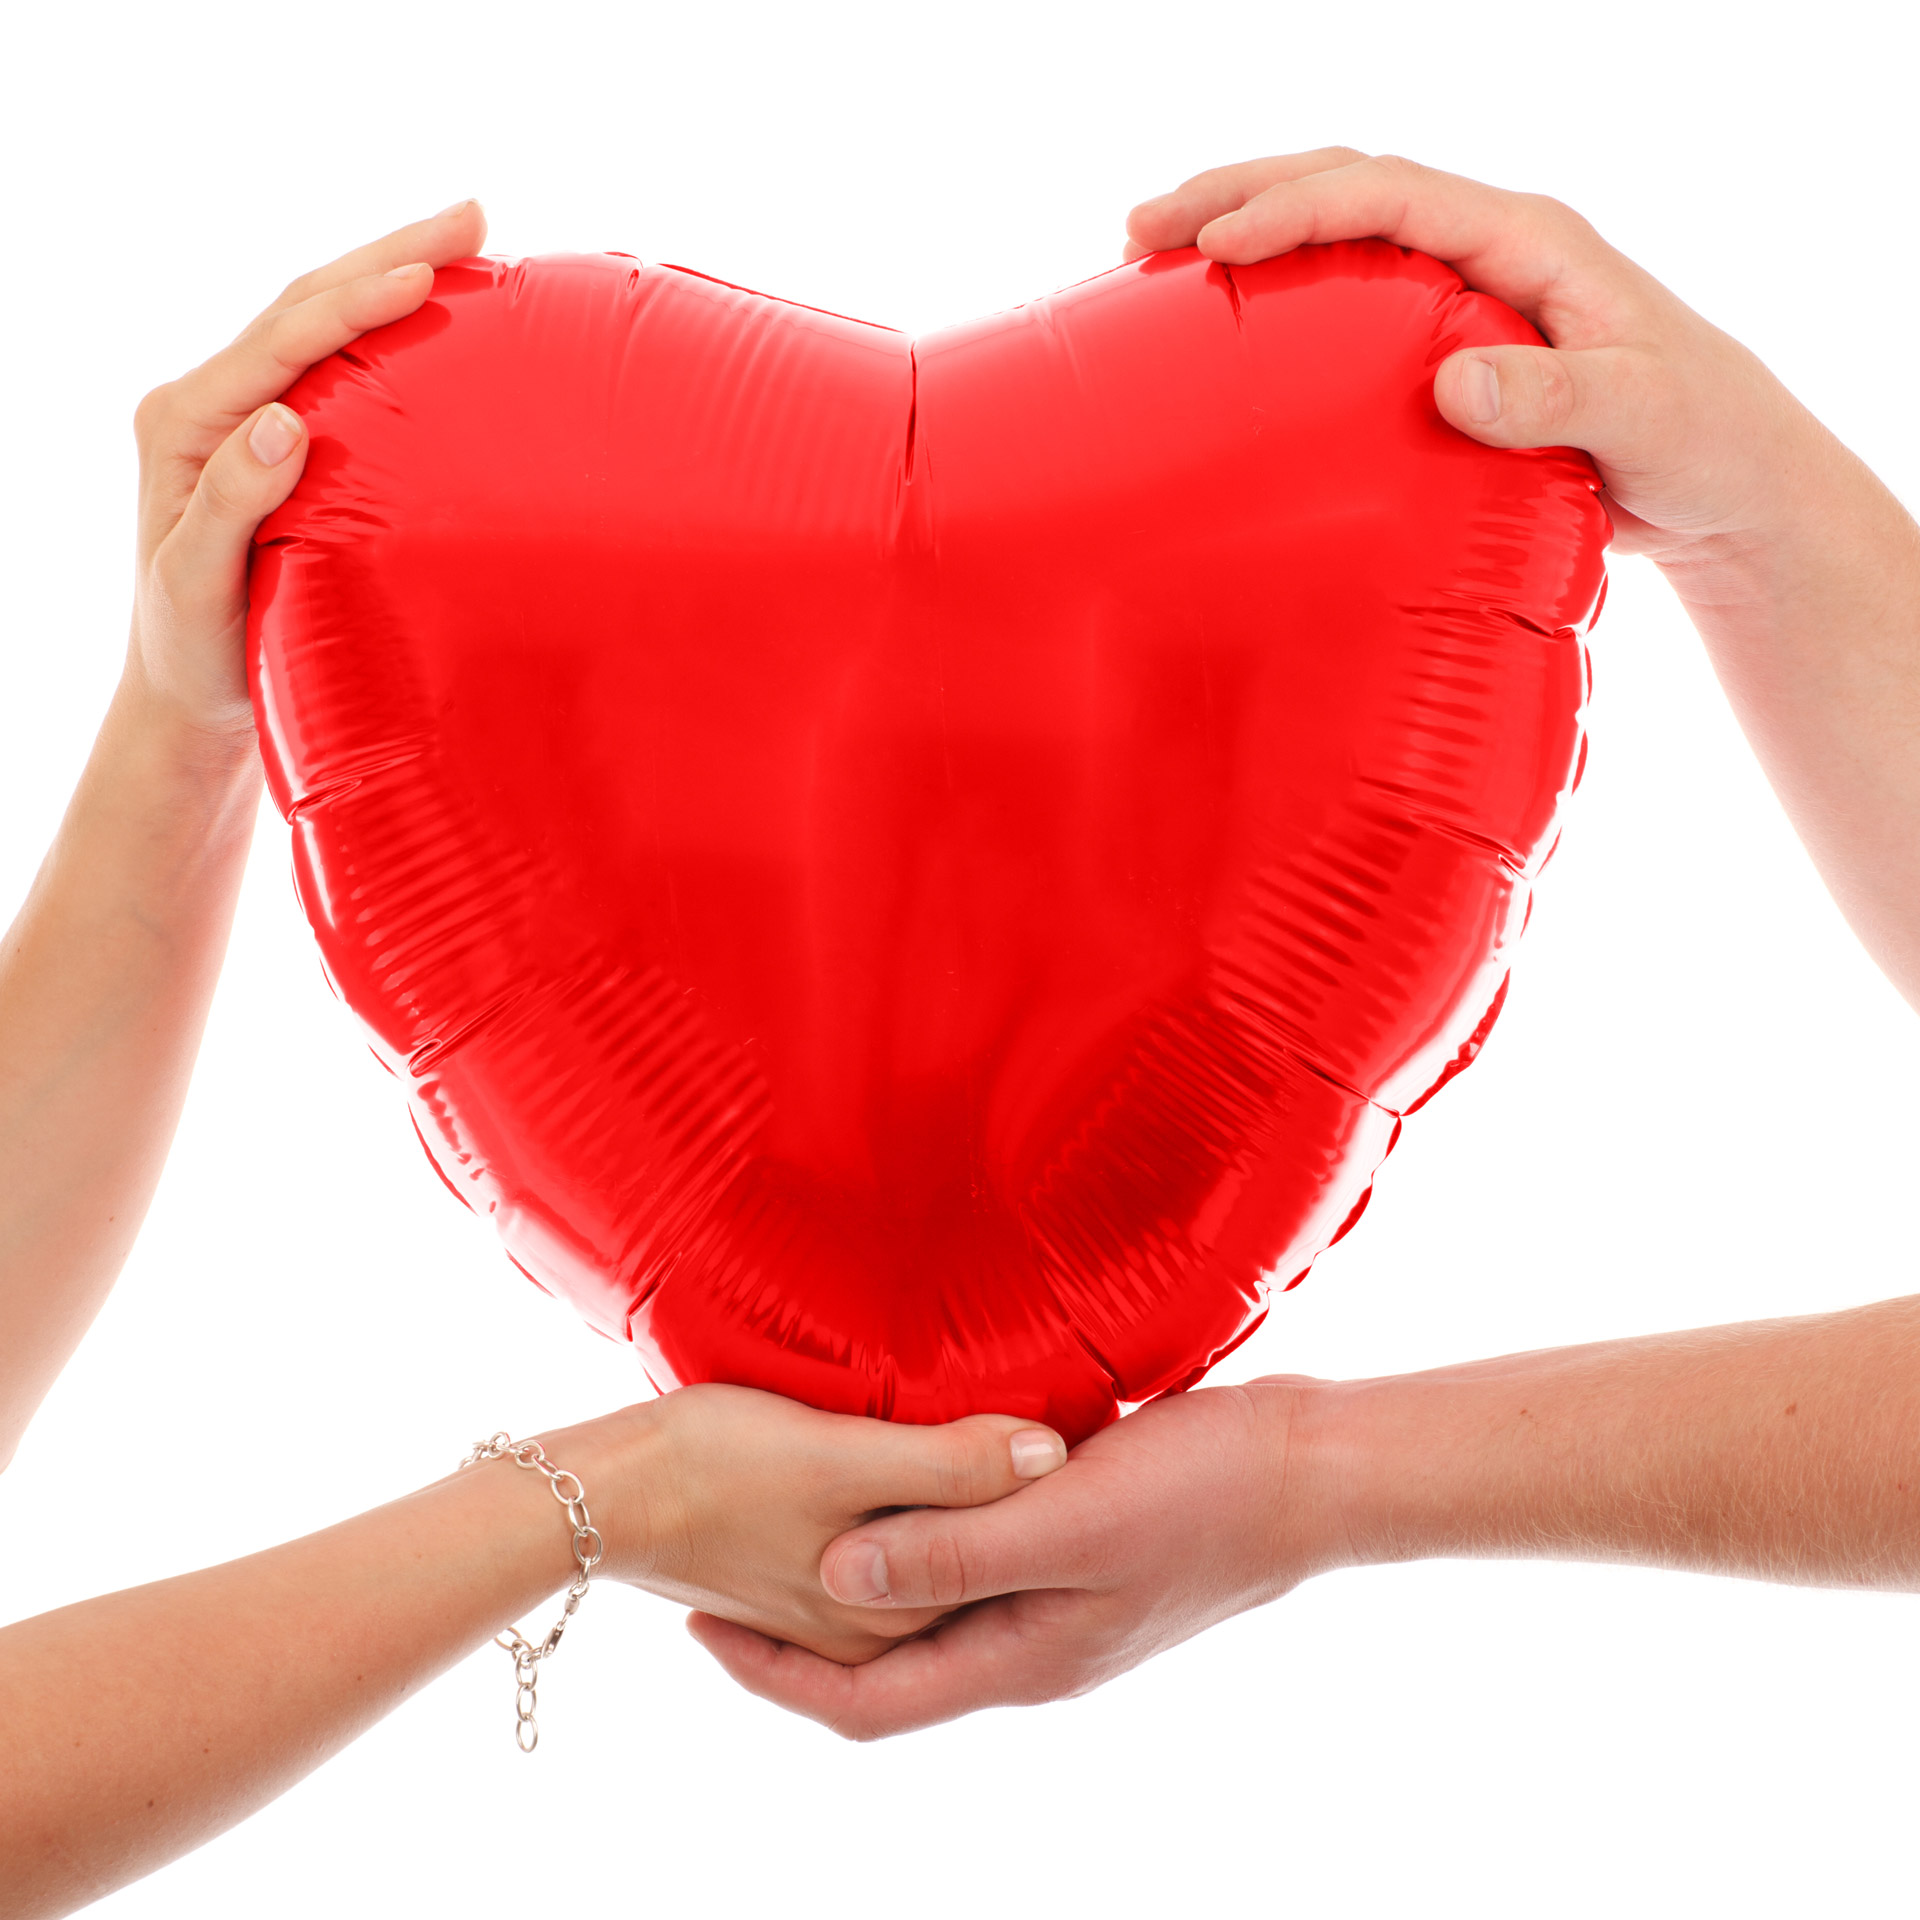 hands-holding-red-heart-free-stock-photo-public-domain-pictures